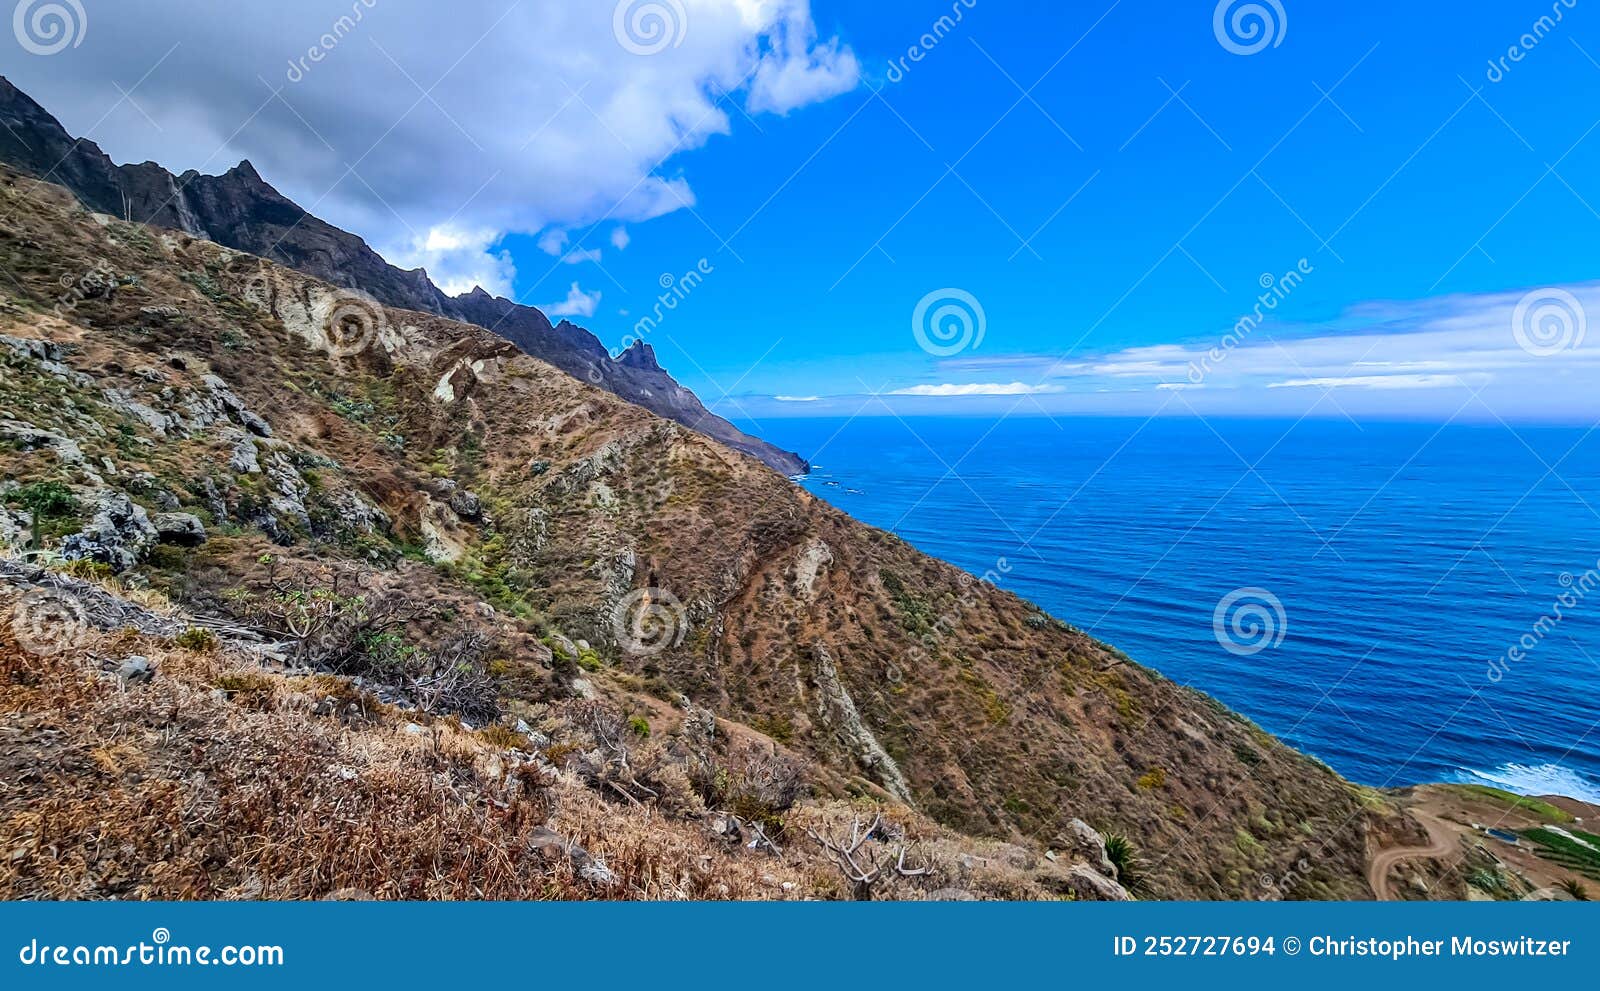 panoramic view of the coastline of the anaga mountain range on tenerife, canary islands, spain. view on cabezo el tablero crag